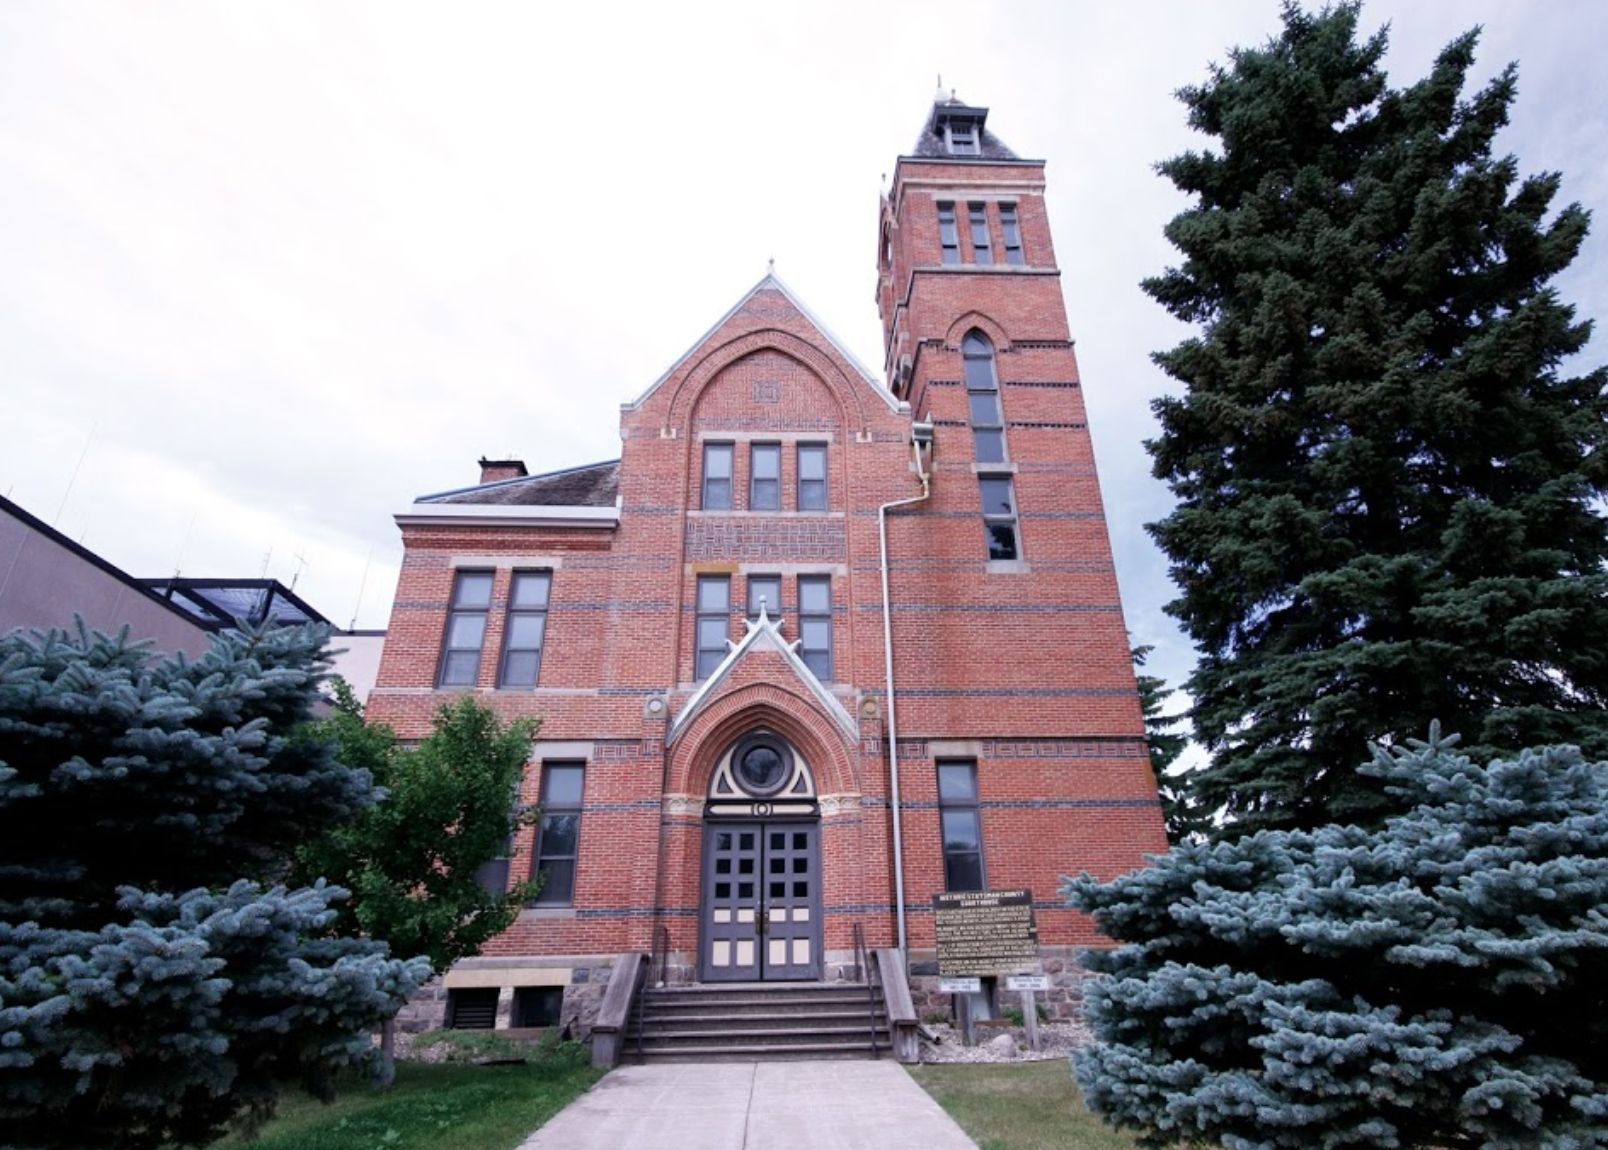 The Stutsman County Courthouse Is The Oldest And One Of The Rarest In North Dakota